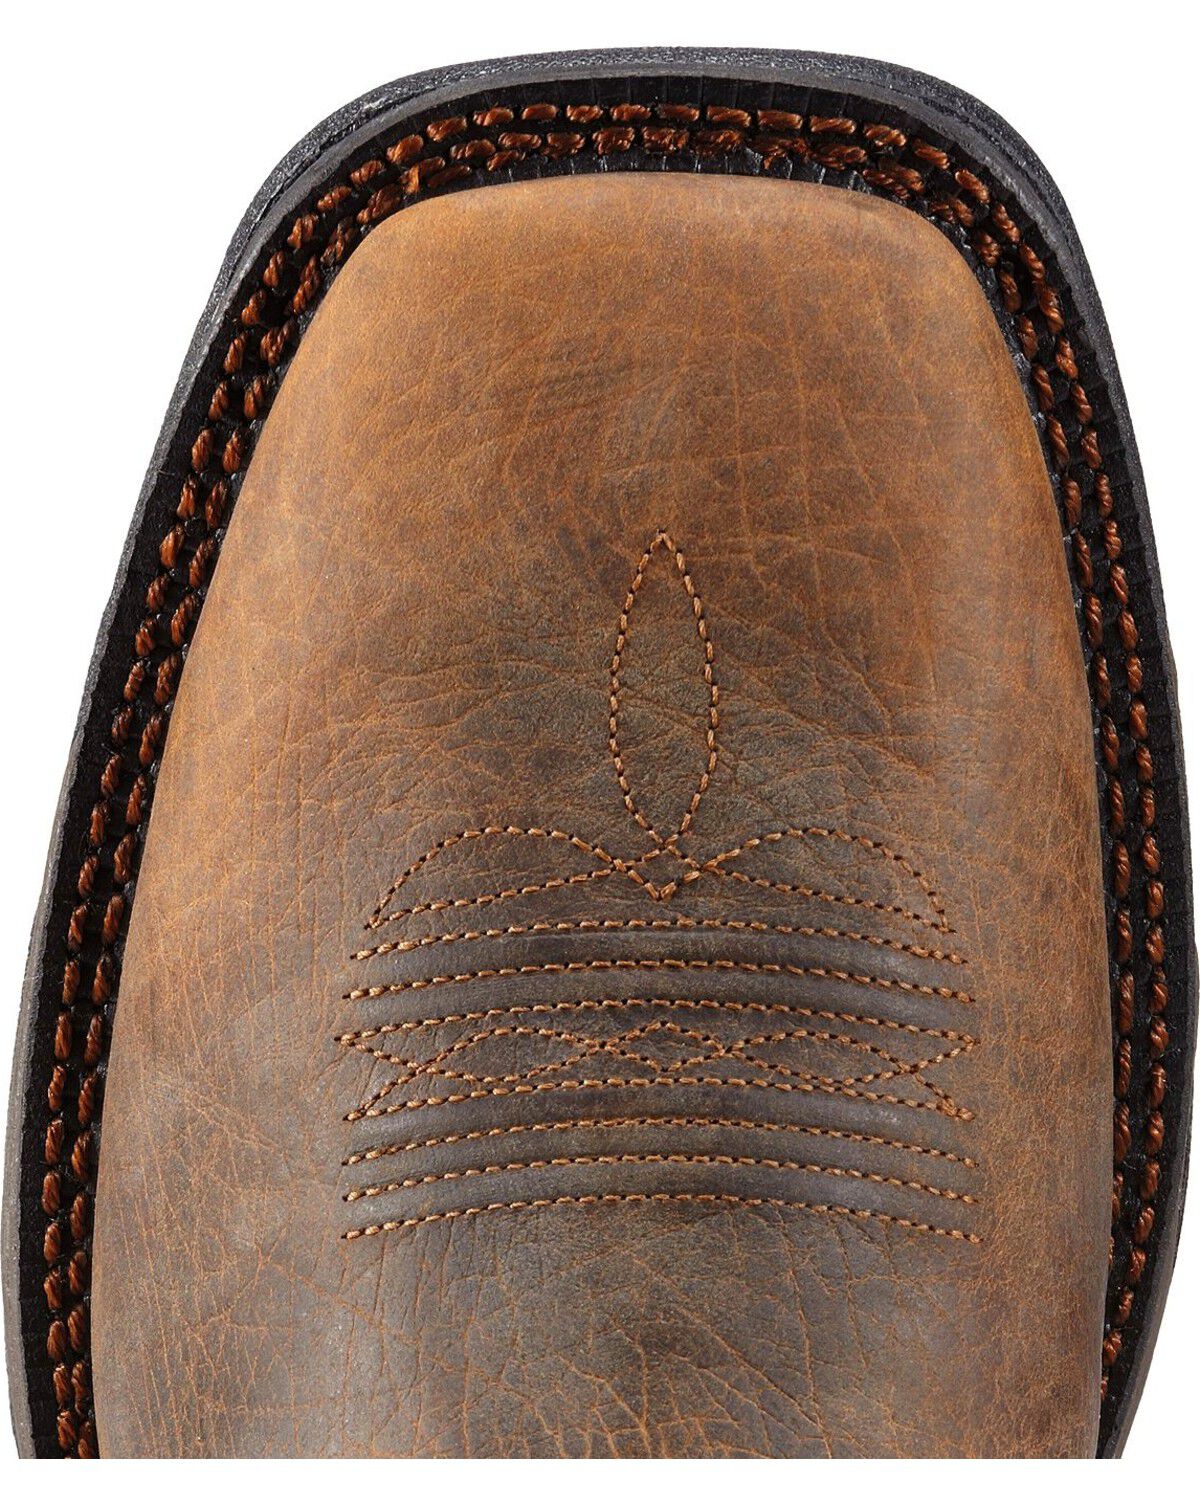 Details about   Ariat Mens WorkHog Mesteno II Western Work Boots Rustic Brown/Stone #10018556 